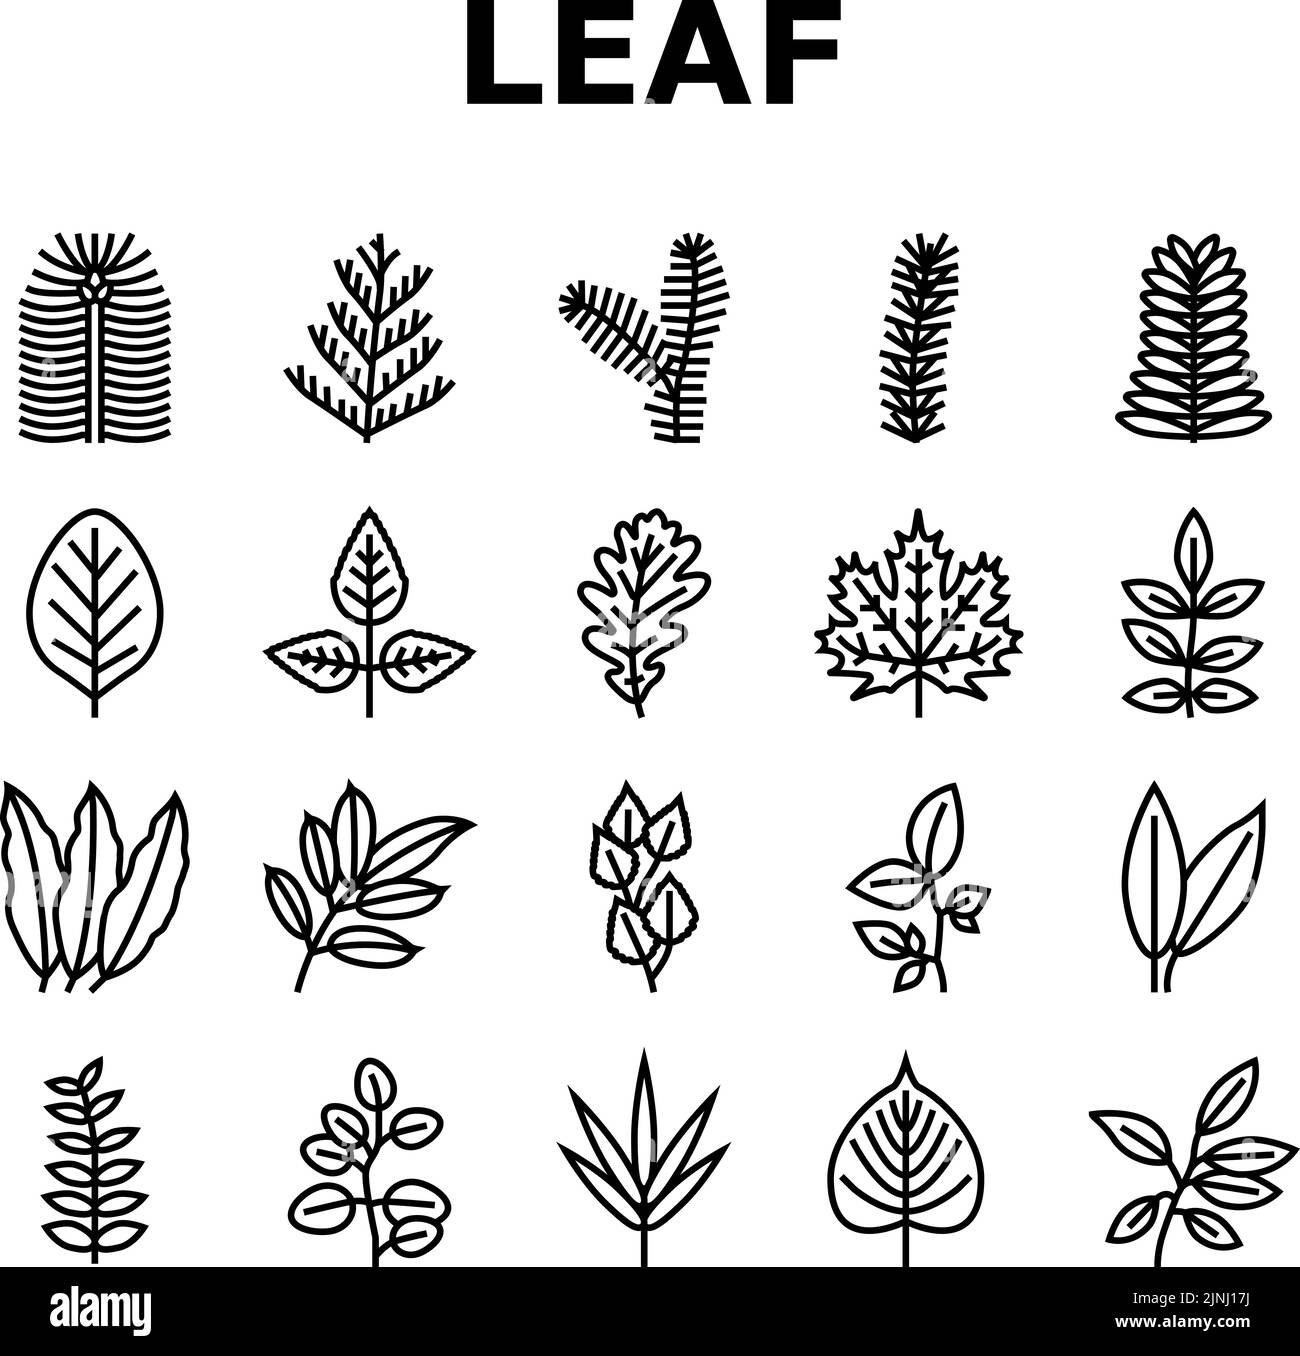 Leaf Of Tree, Bush Or Flower Icons Set Vector Stock Vector